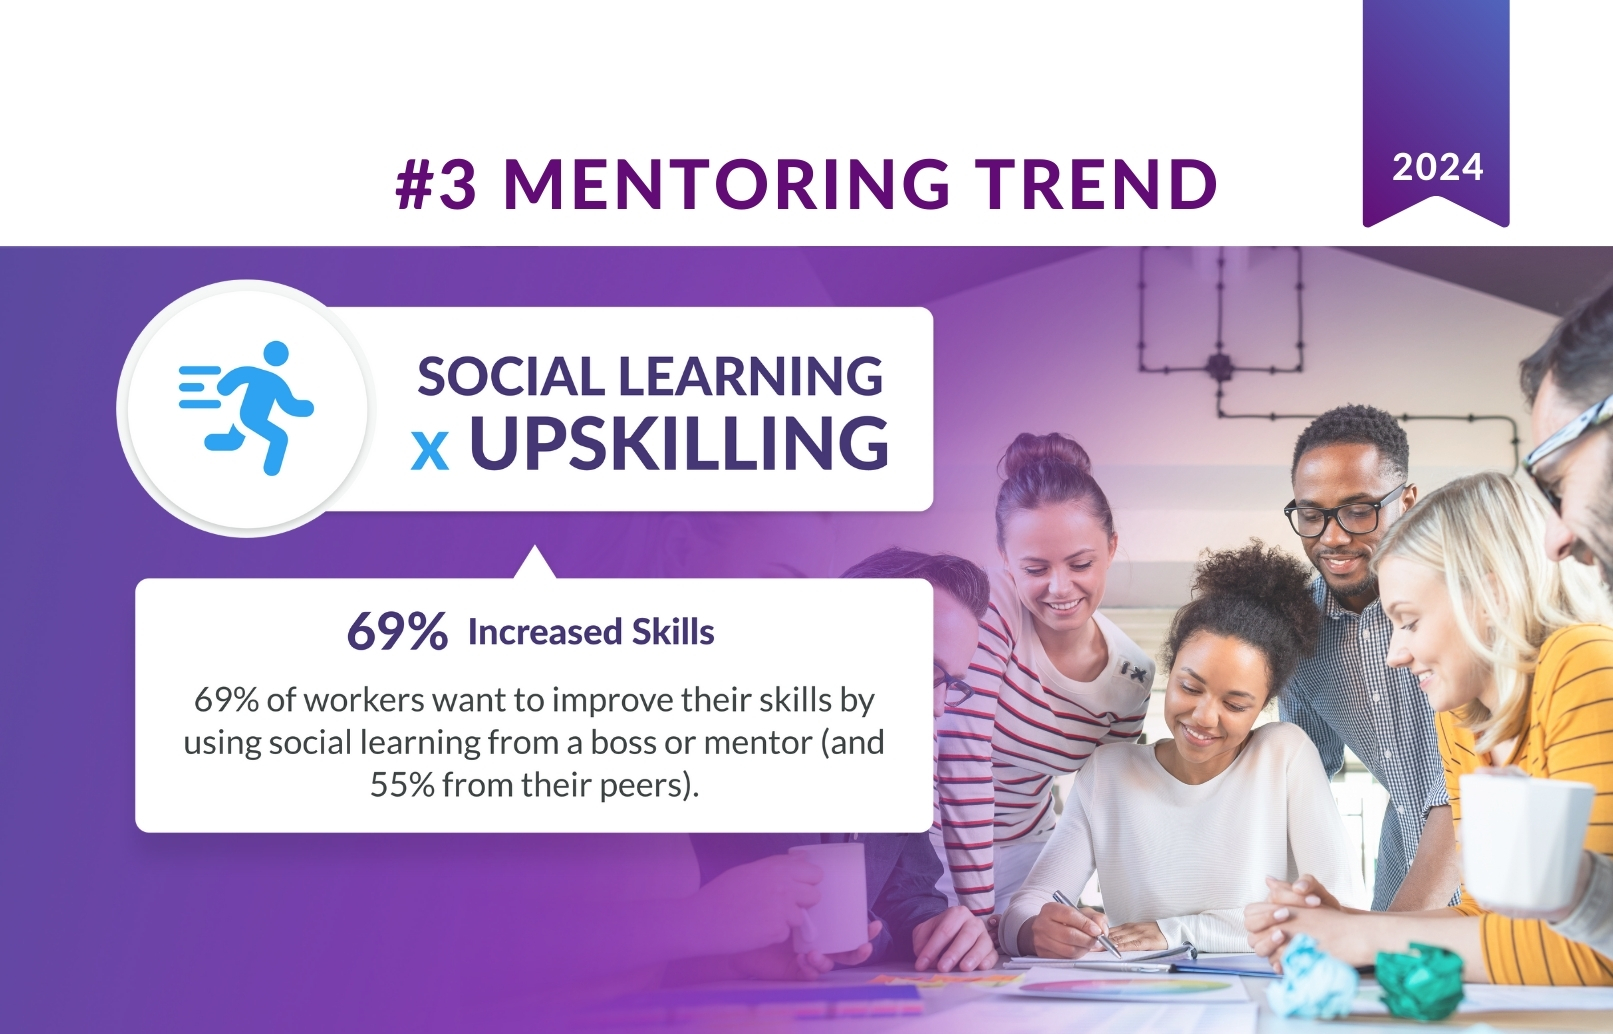 social learning and upskilling featured image.